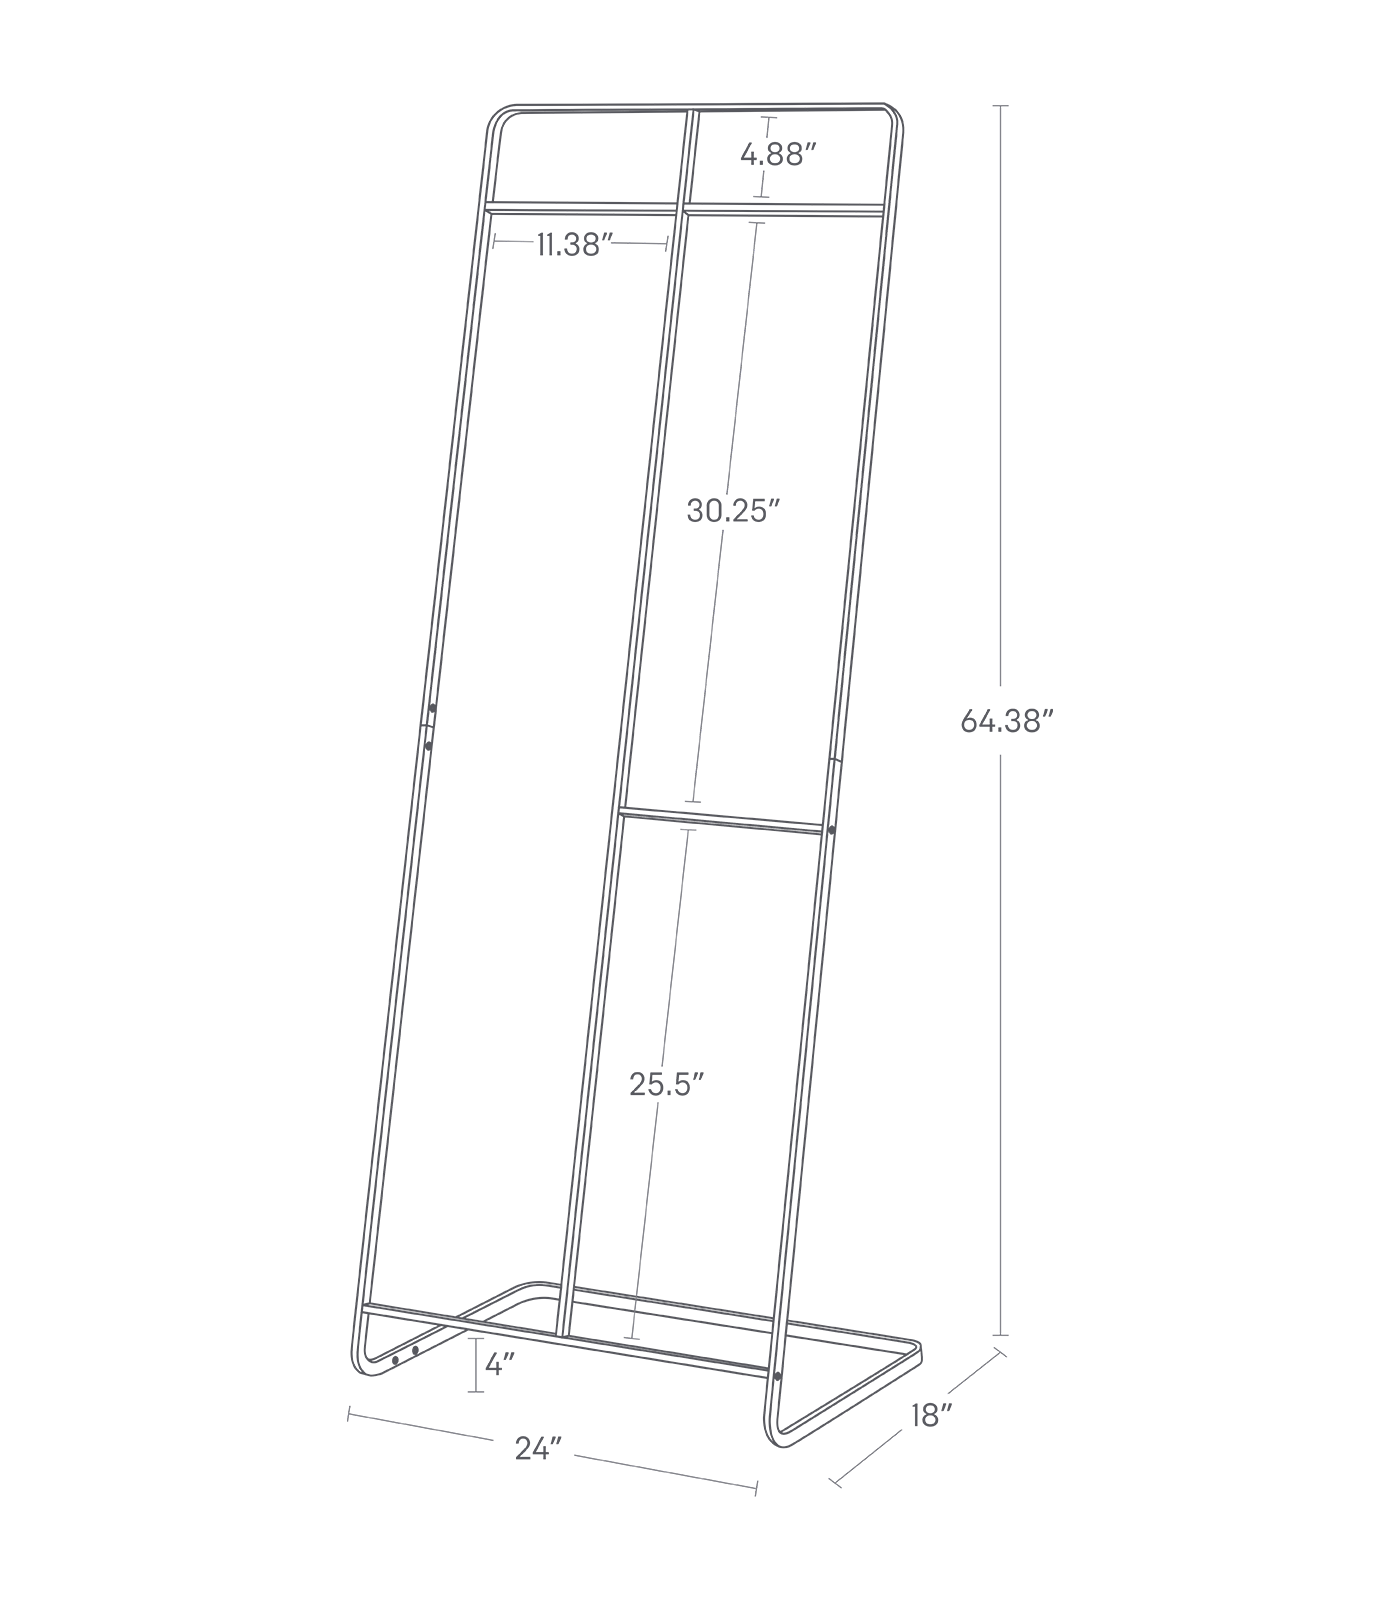 Dimension image for Coat Rack showing a total length of 24